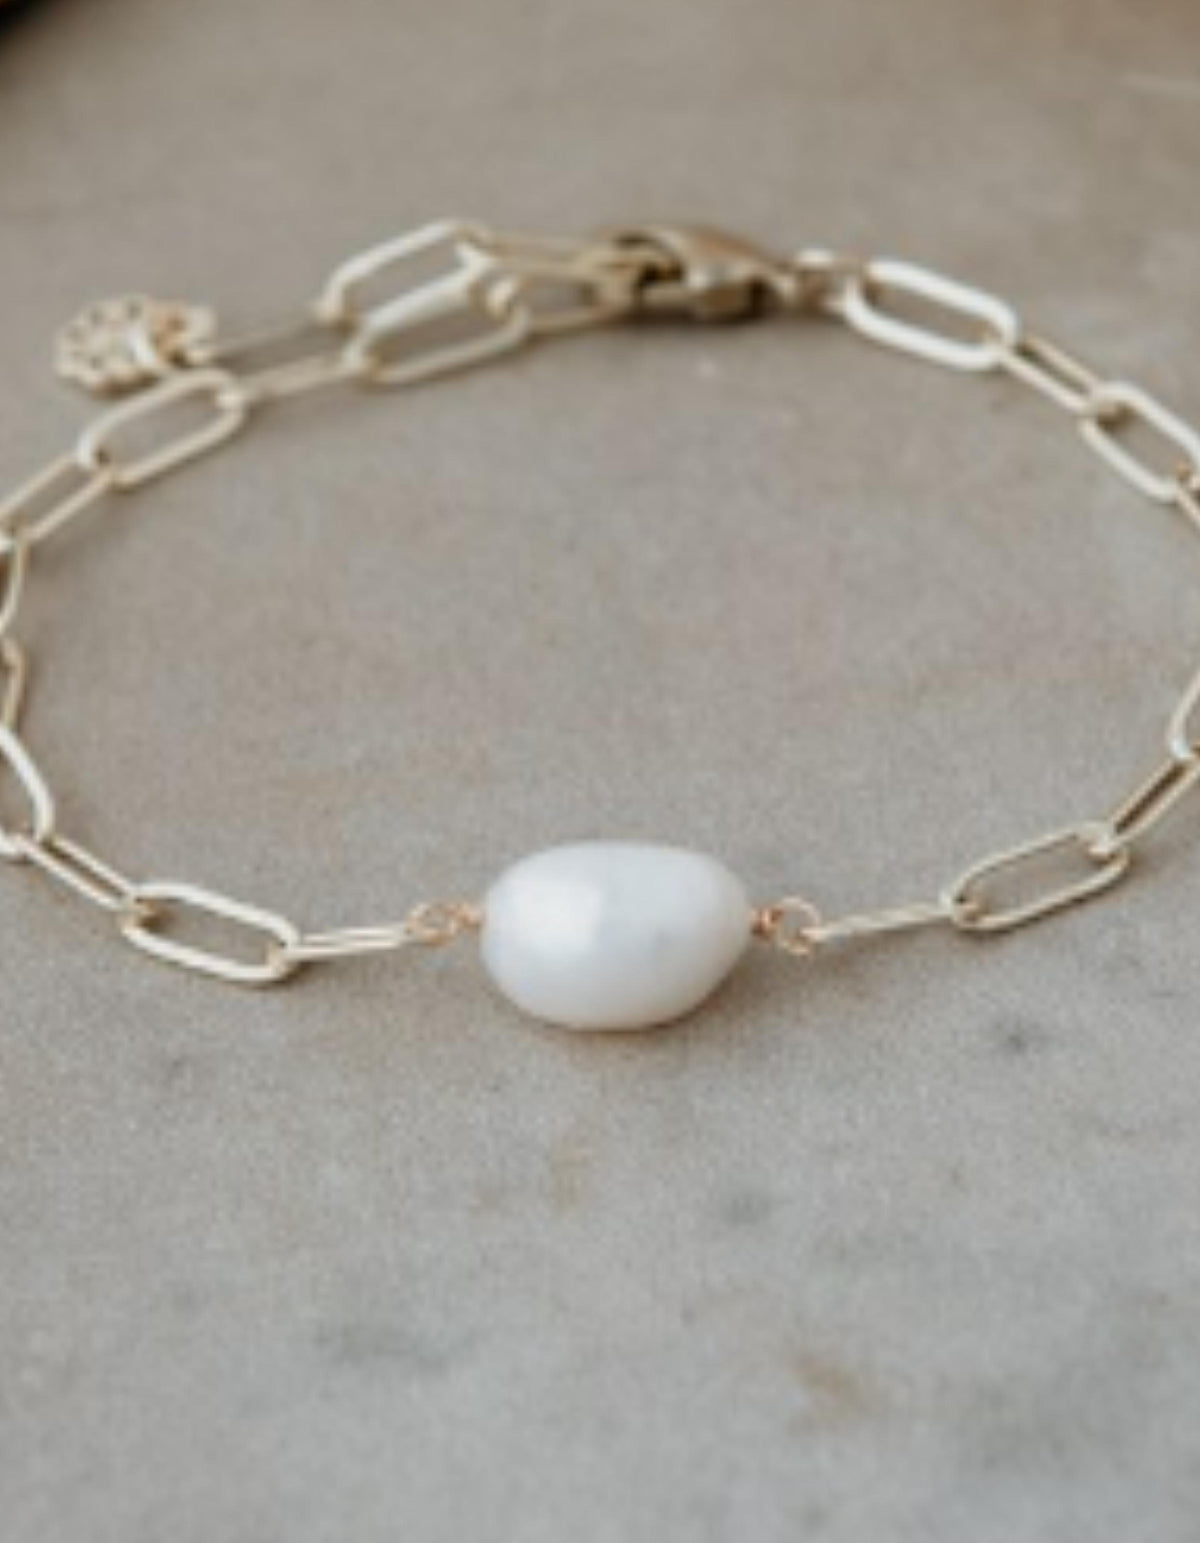 Bracelet Gwendolyn Gold Chain White Pearl - Onze Montreal